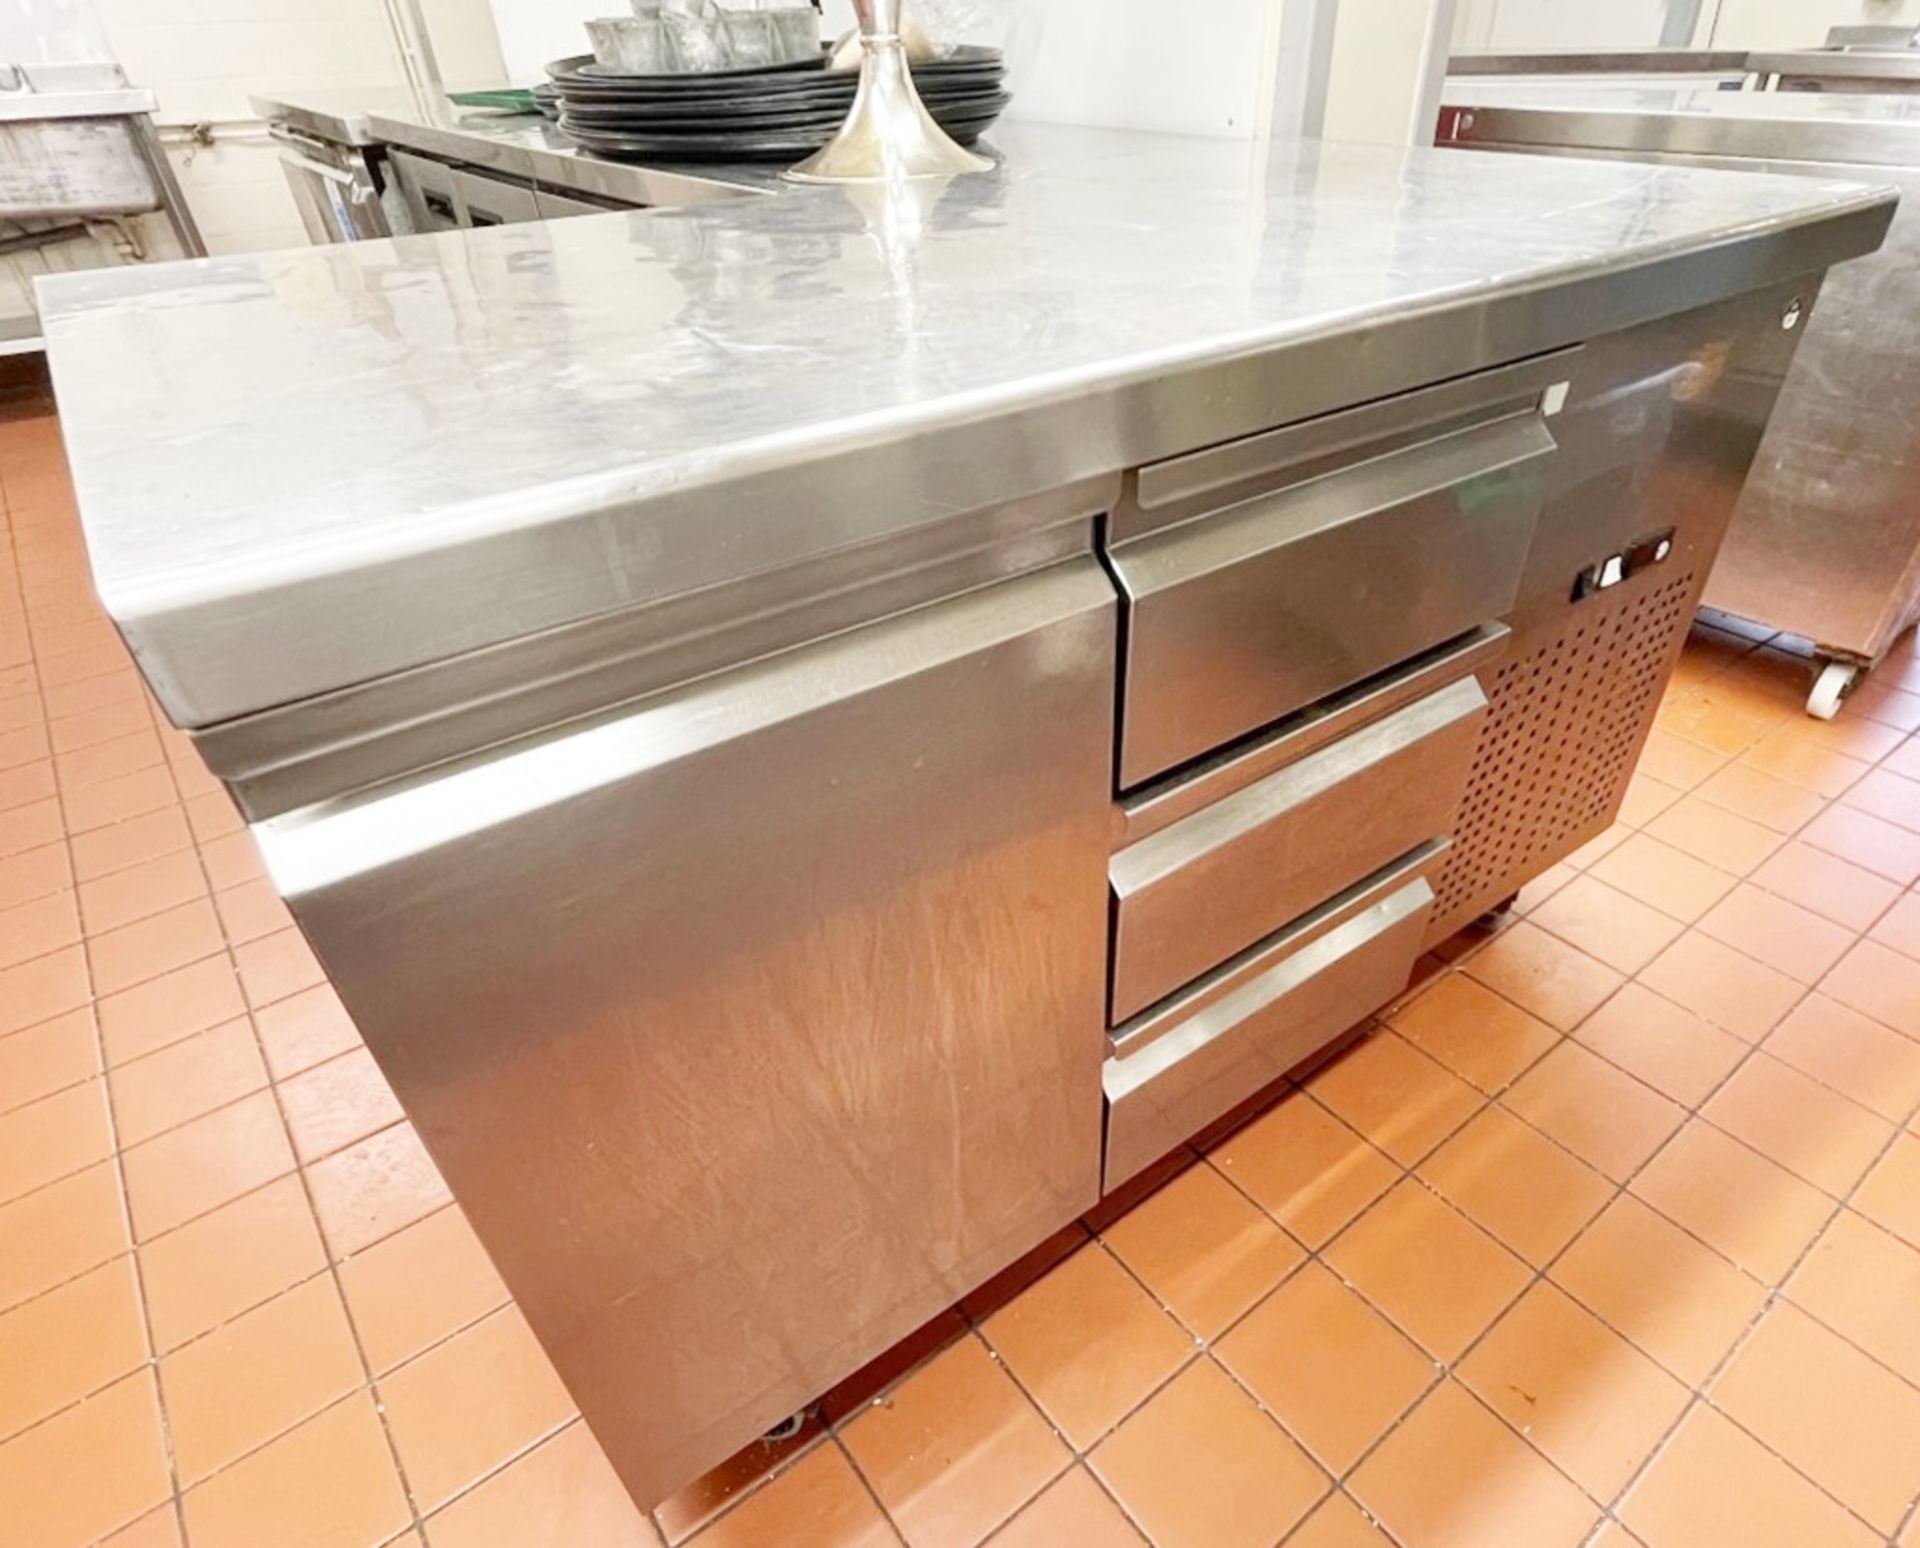 1 x Commercial Refrigerated Prep Counter With Single Door and Three Drawers - Stainless Steel